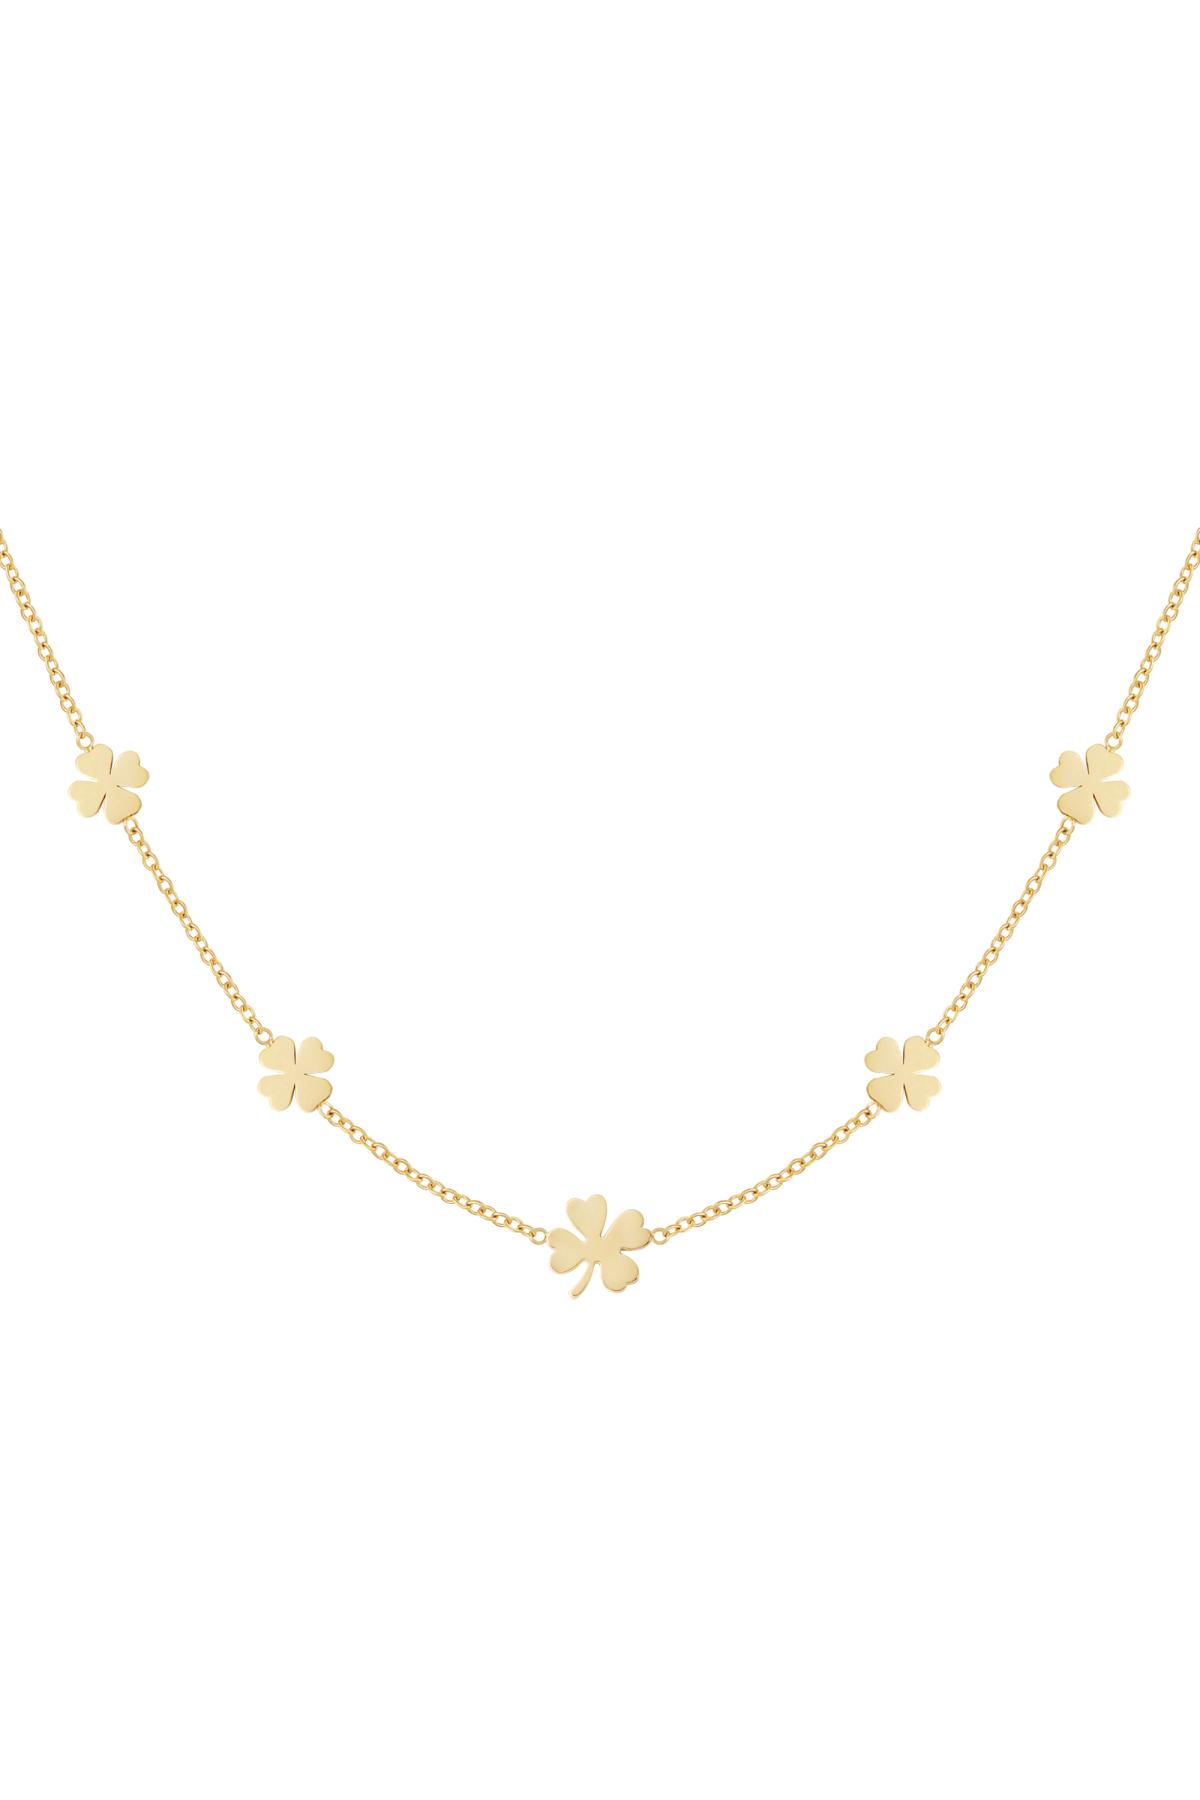 Necklace 5 clovers Gold Stainless Steel 